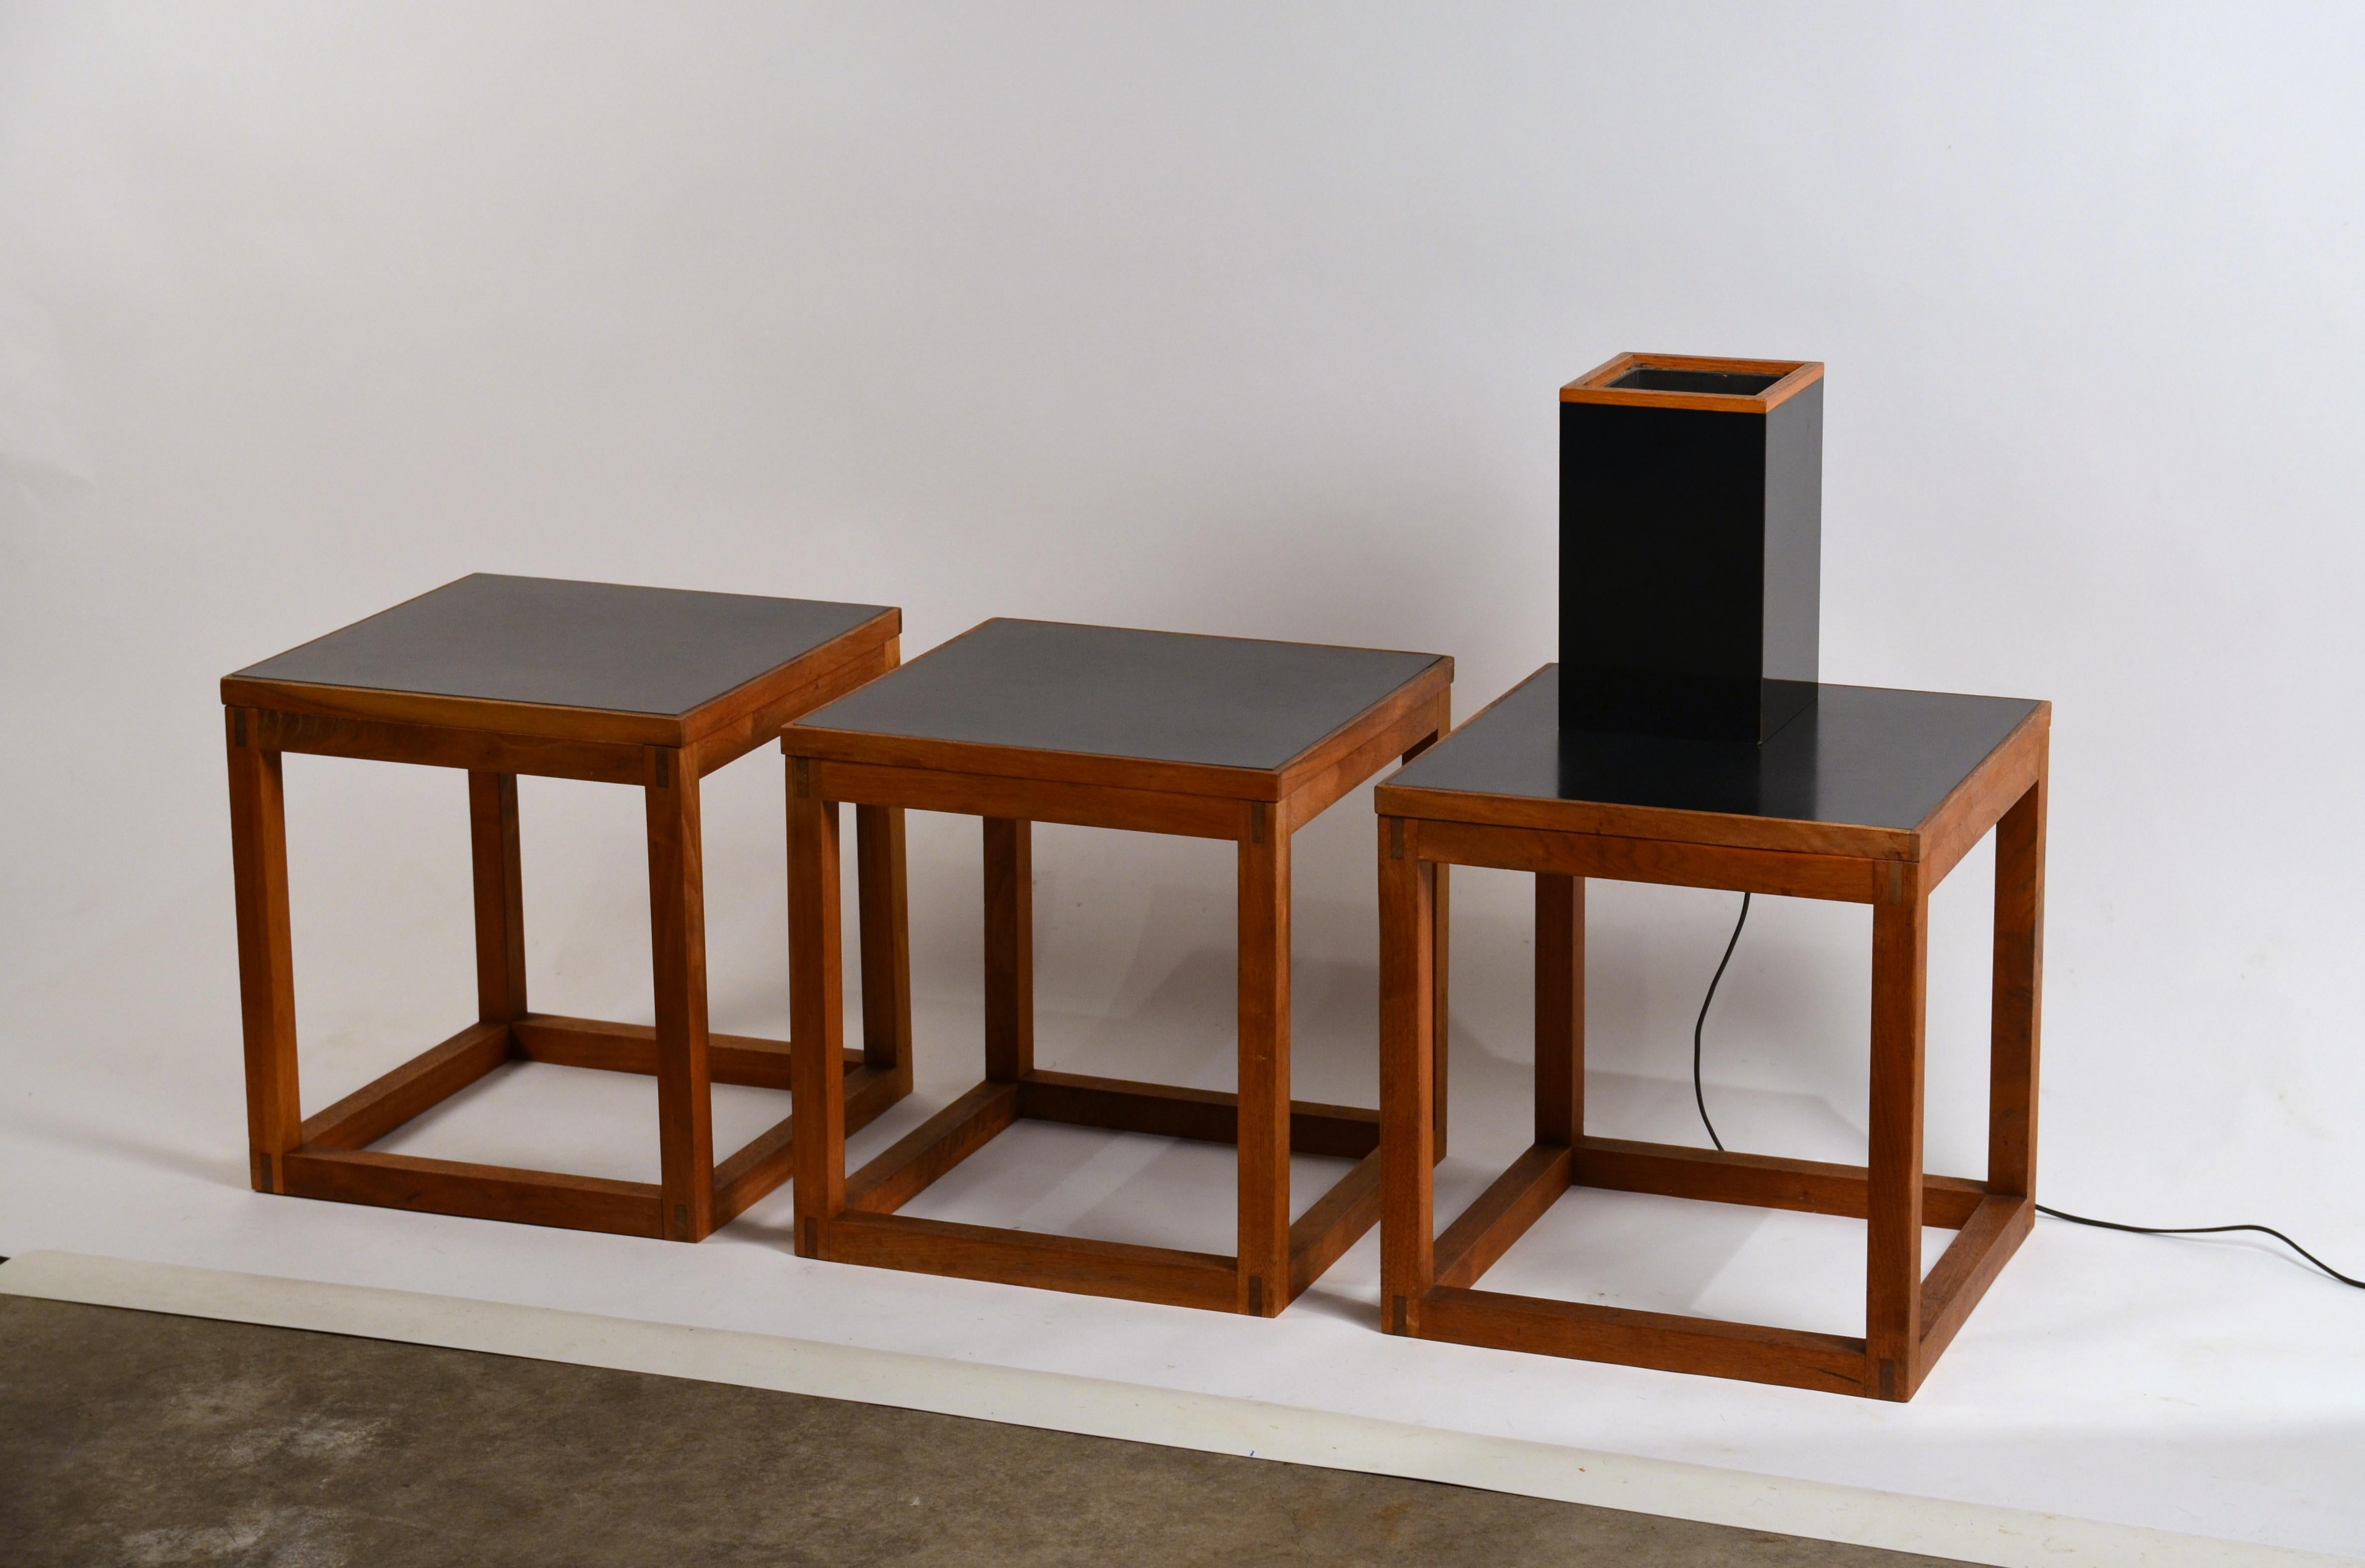 Set of 3 minimal teak and black laminate cube side or end tables in the style of Donald Judd. Matching lamp included.

Dimensions listed are for each table.

The lamp is 6 in. wide x 6 in. deep x 10 in. tall.

Versatile minimal design. Can